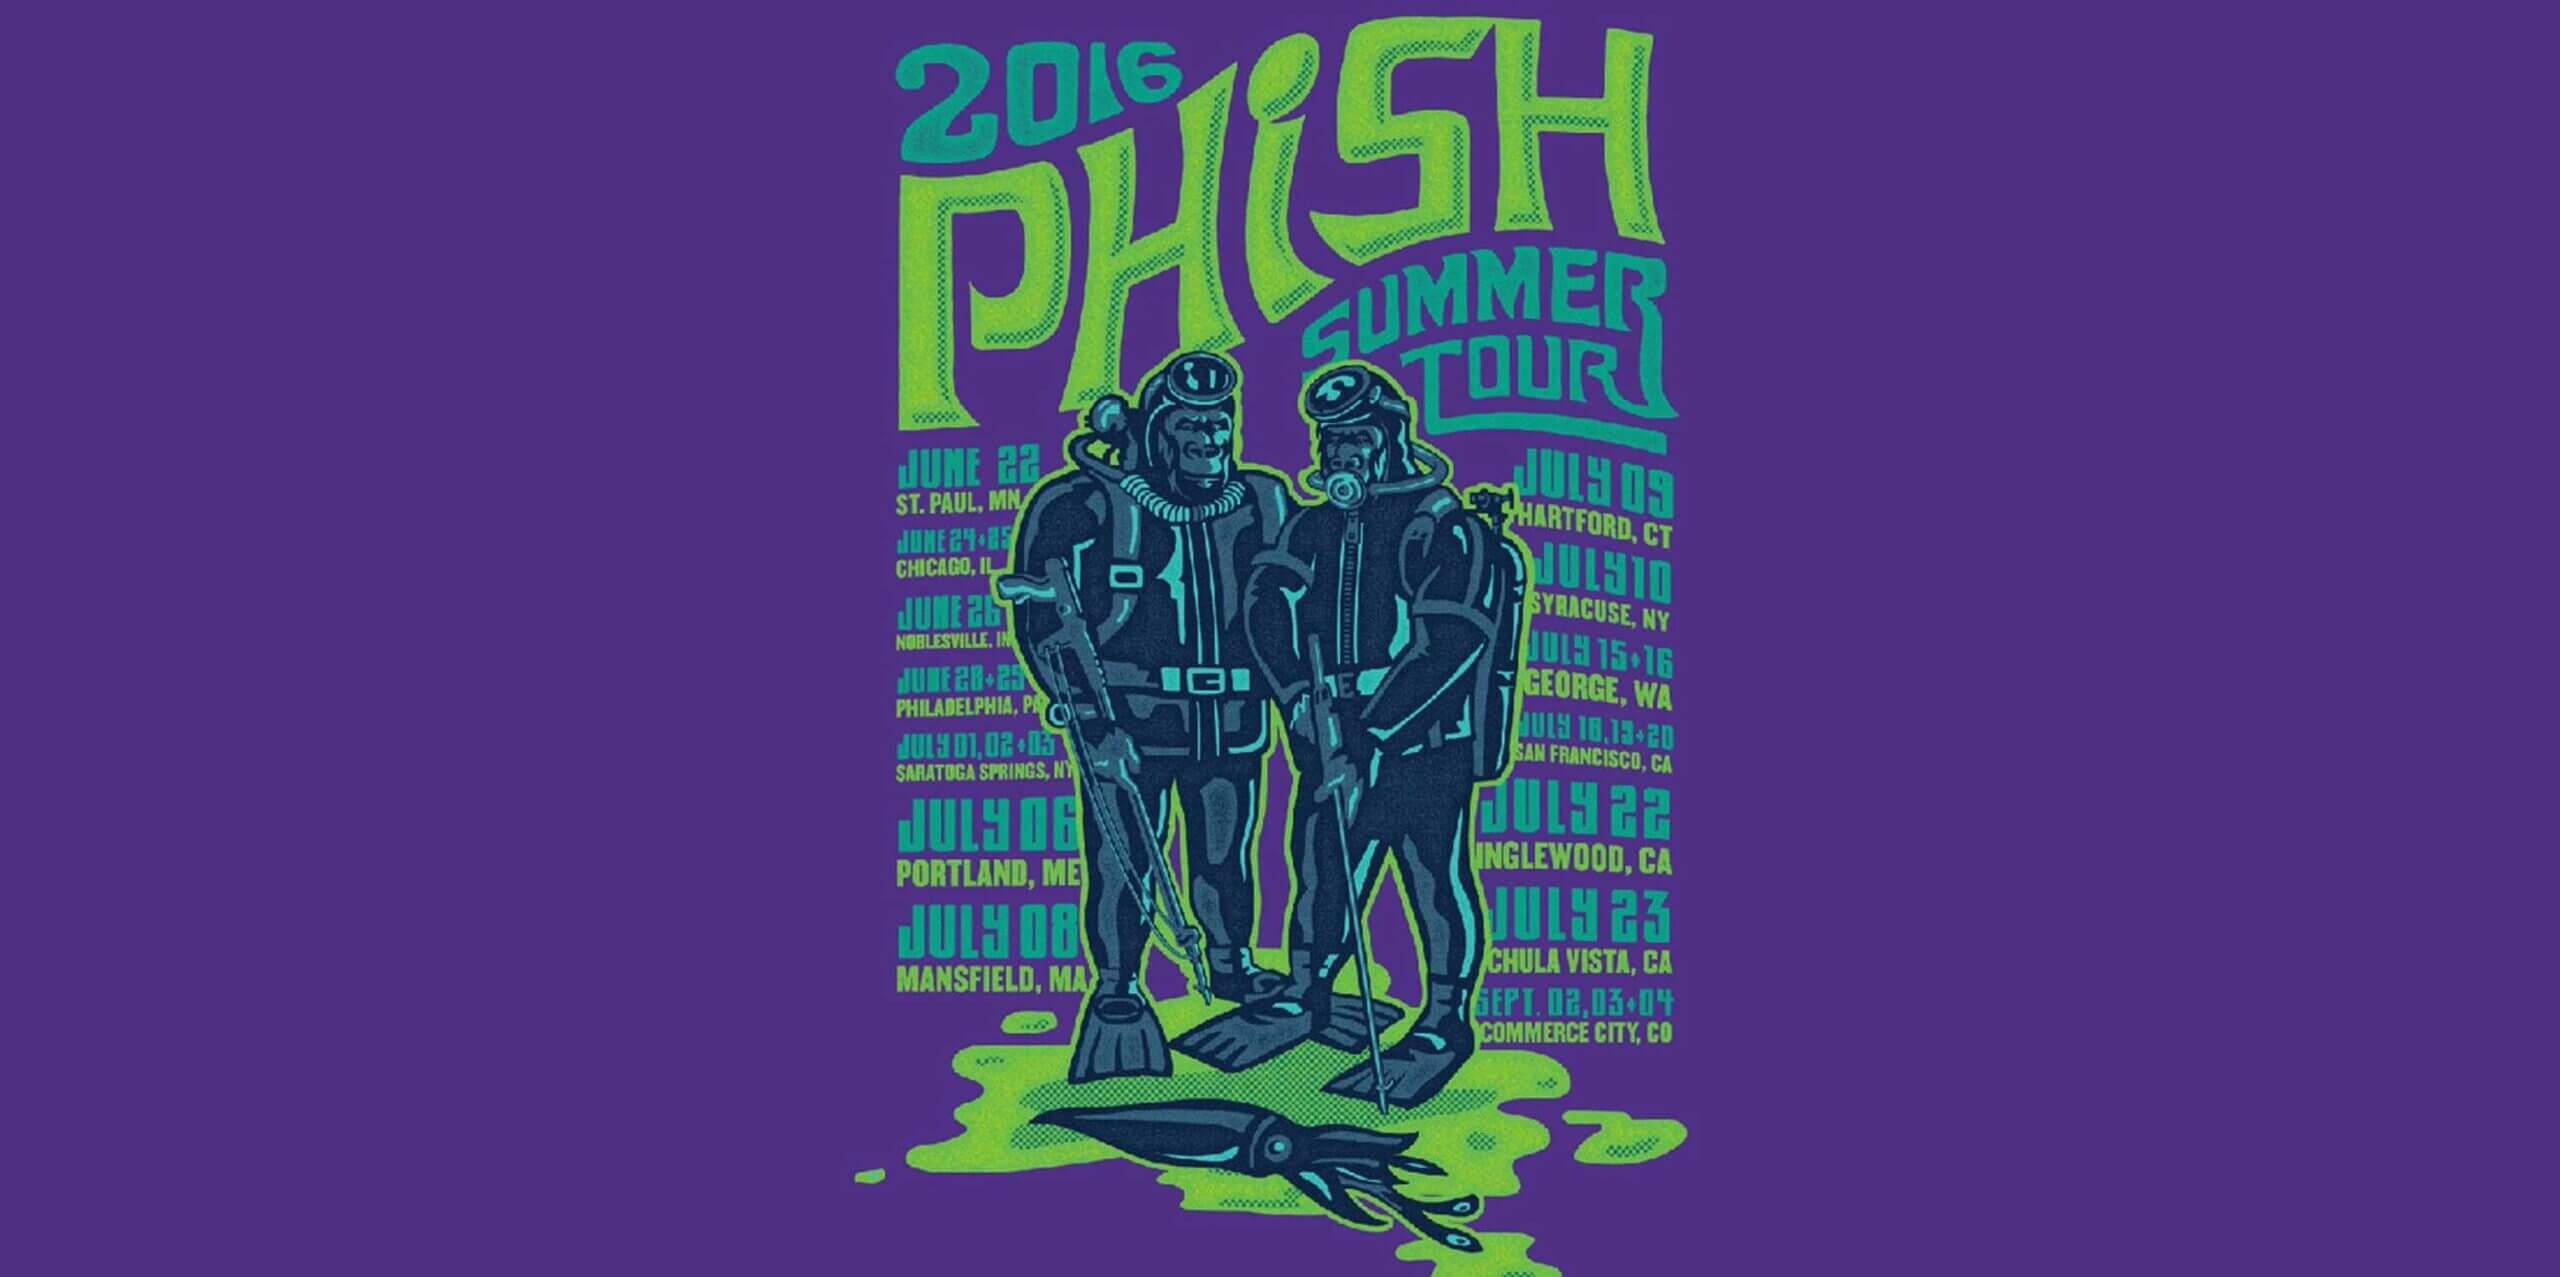 A concert poster for the 2016 Summer Tour for Phish